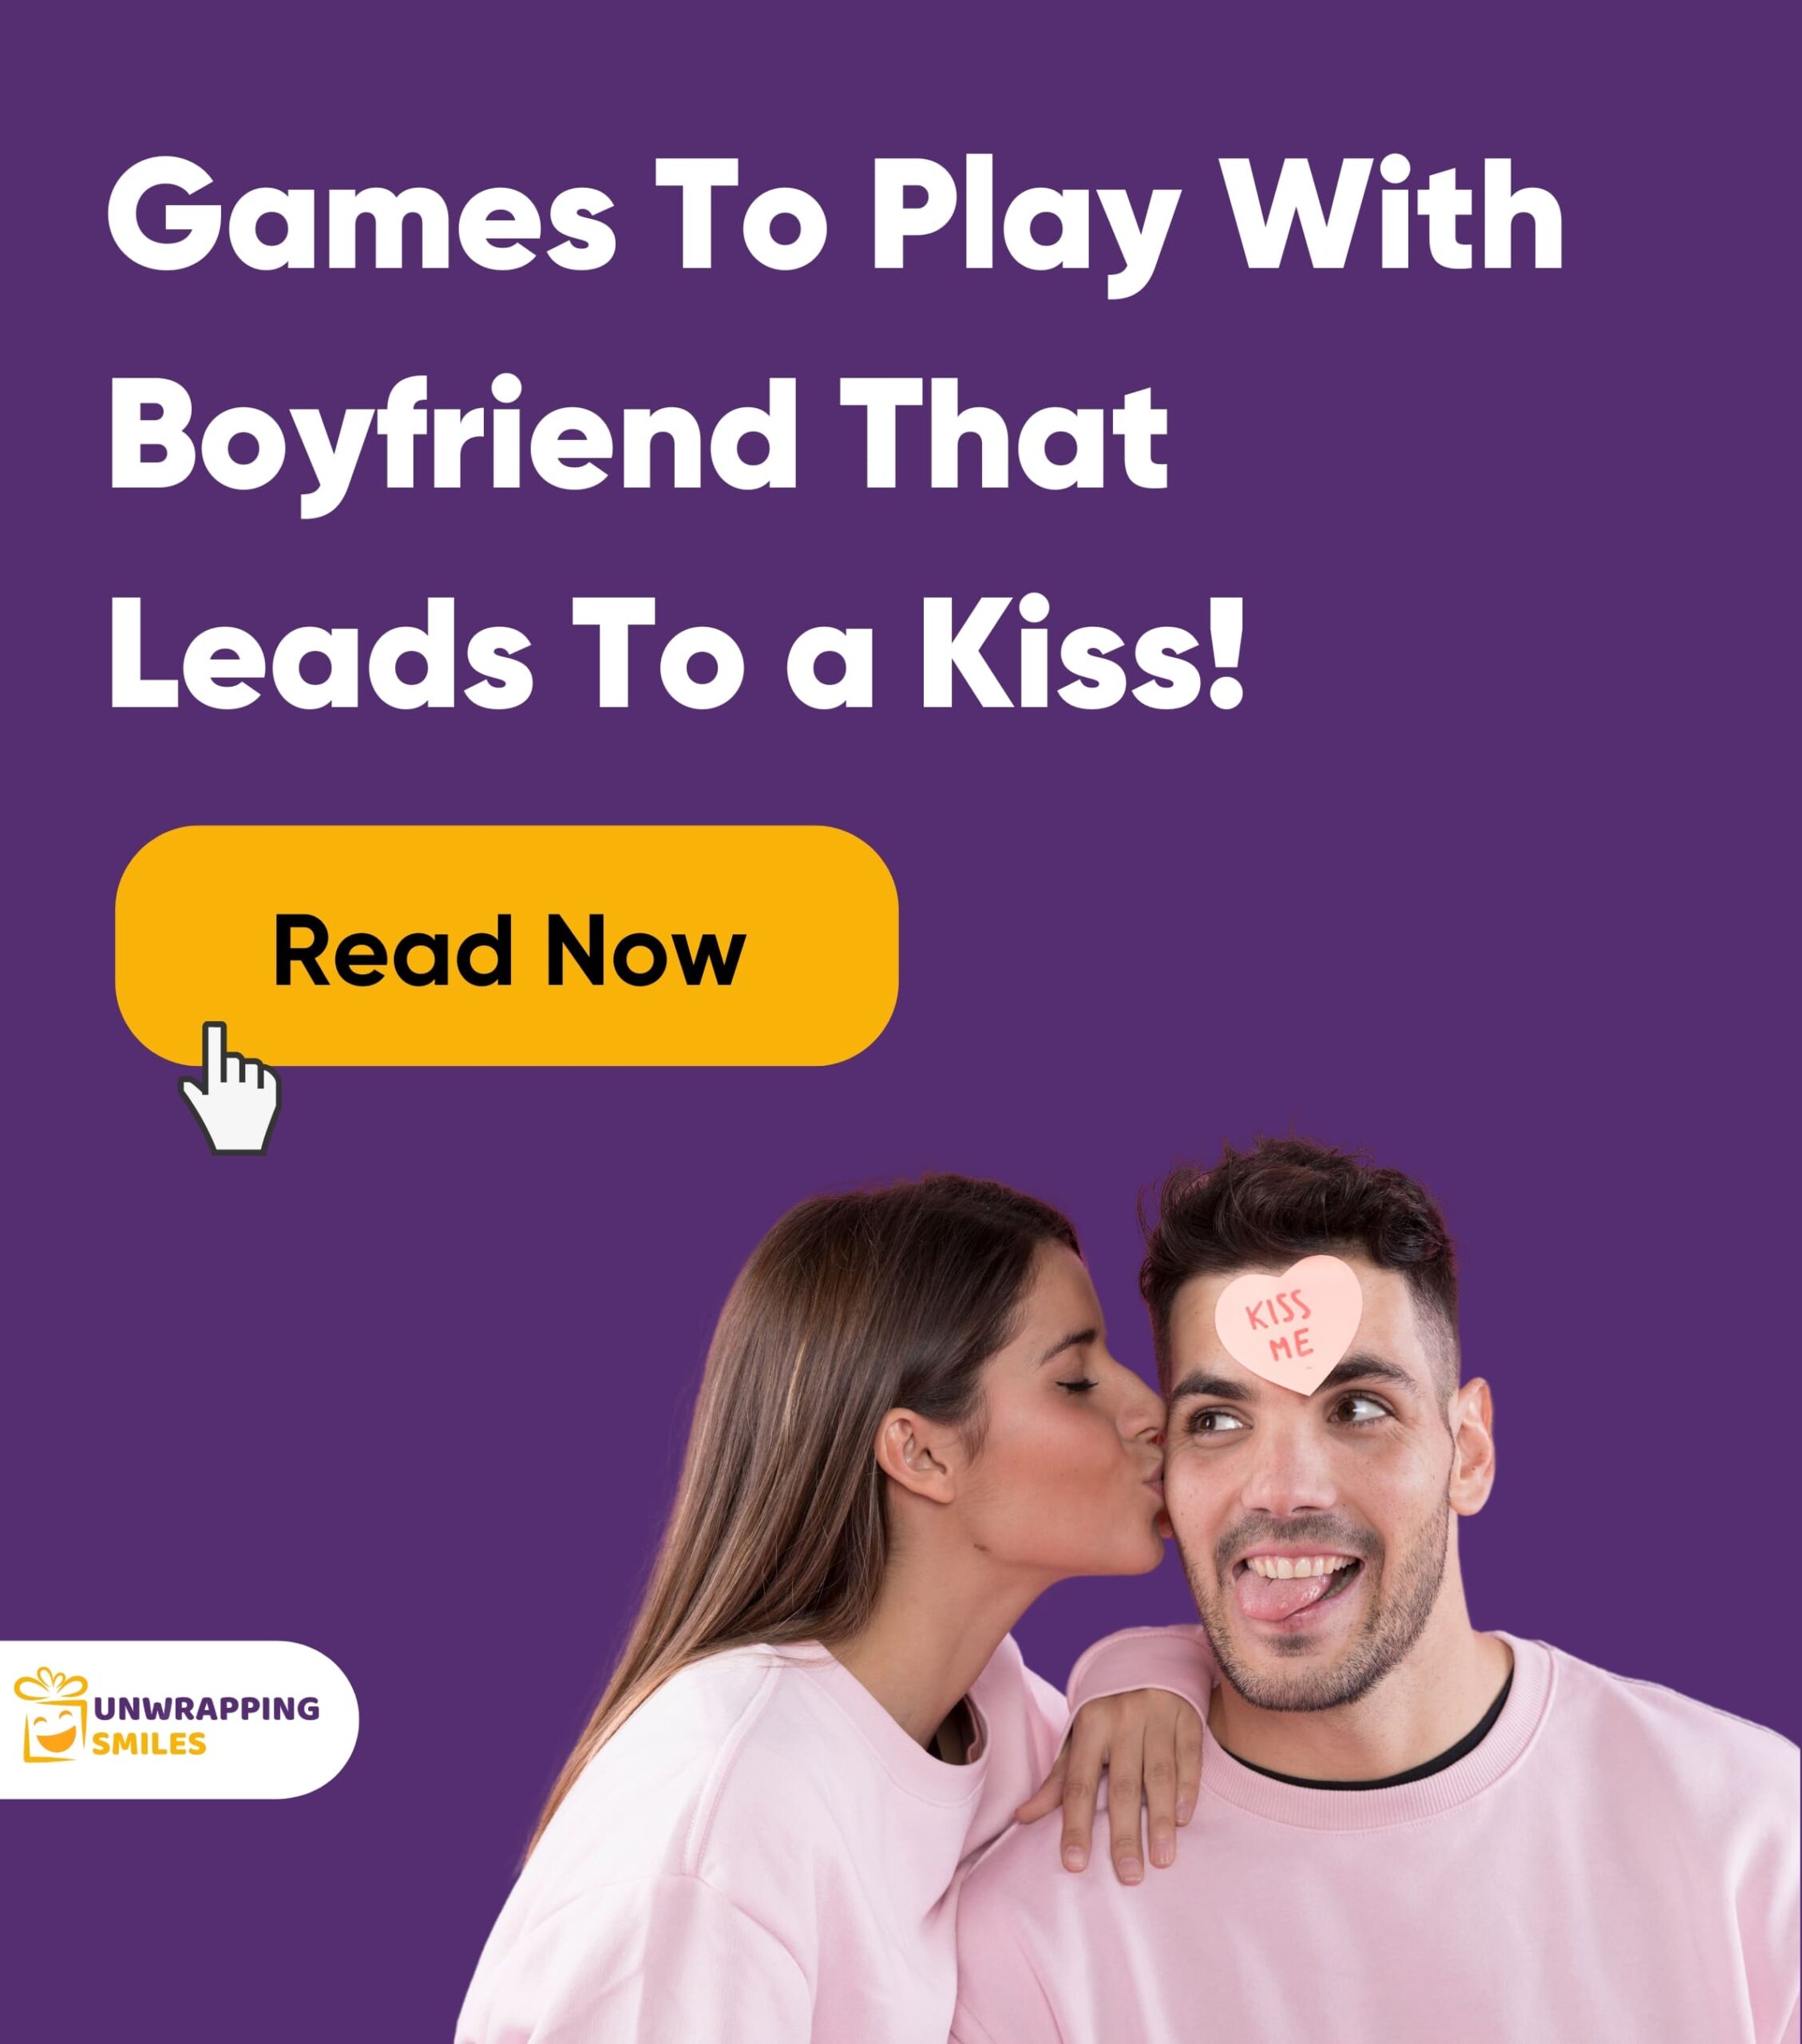 Games To Play With Boyfriend That Leads To a Kiss